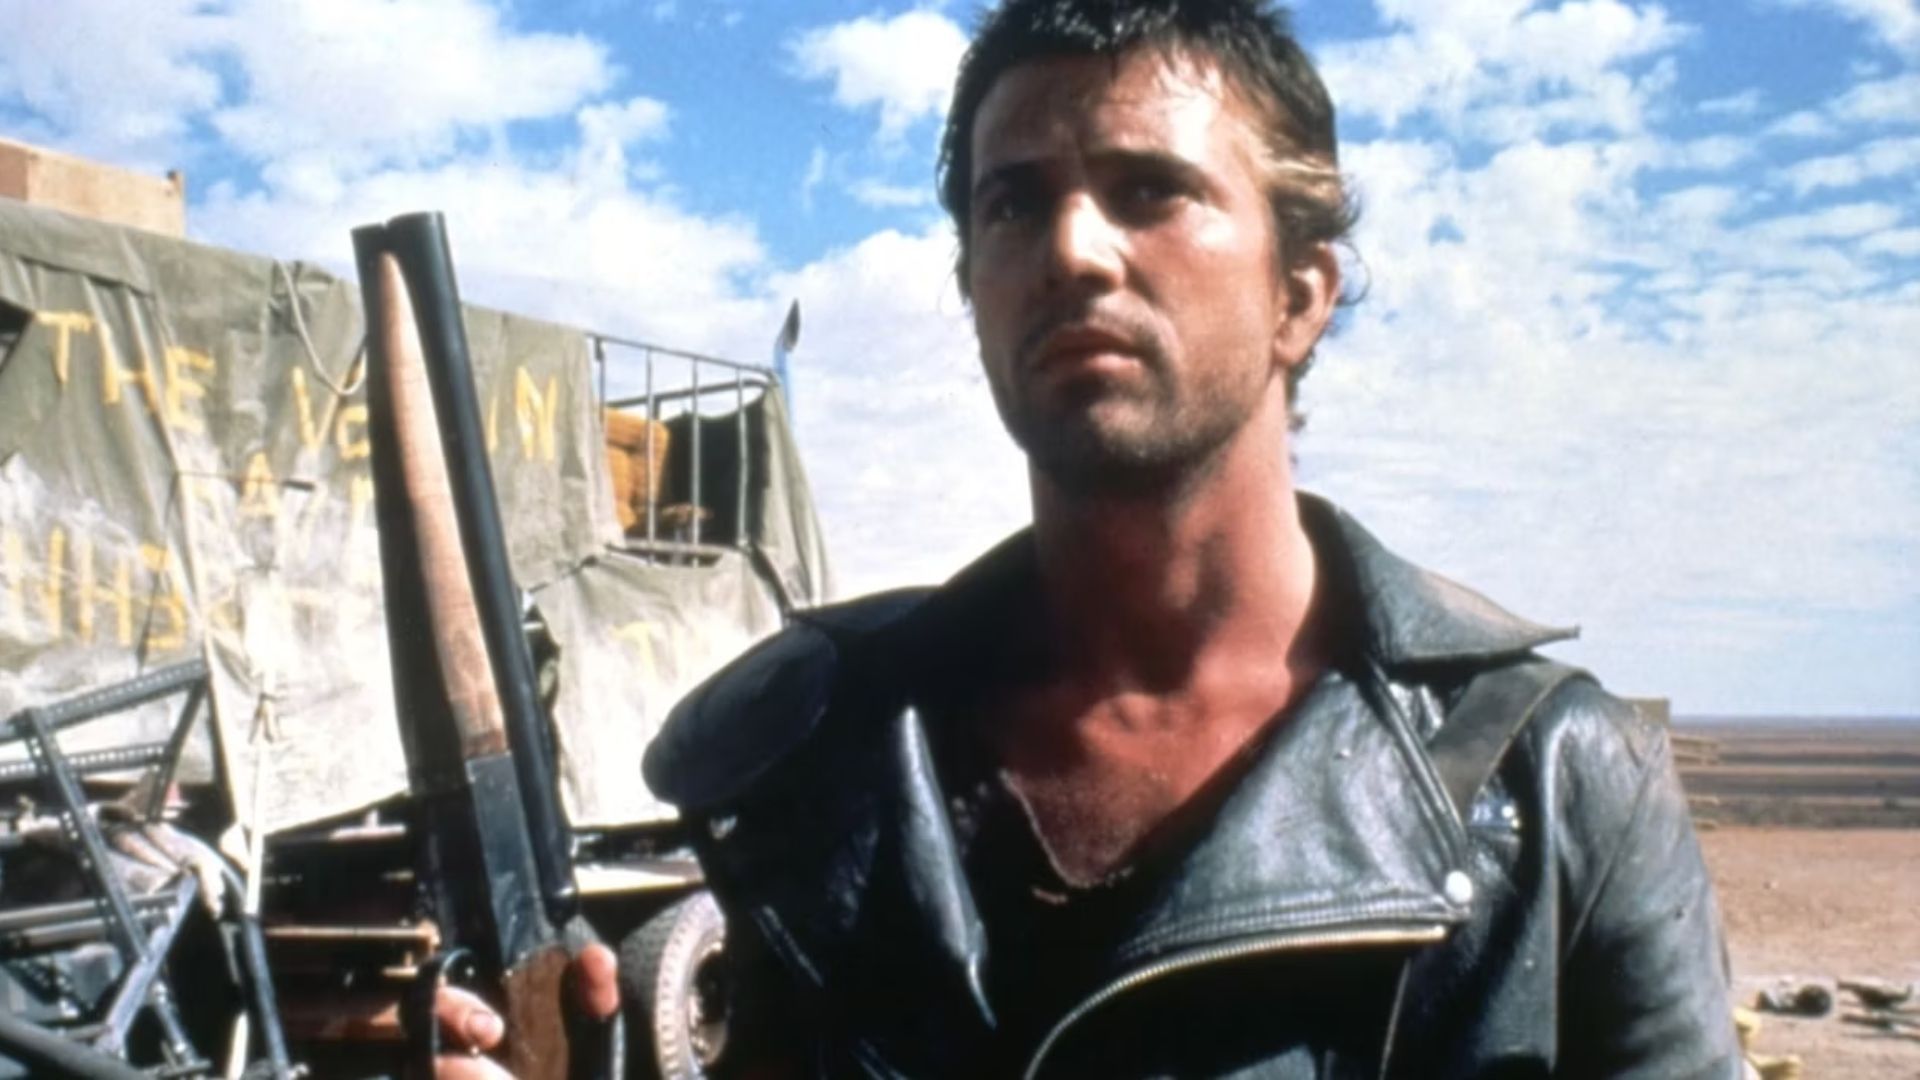 Mel Gibson in Mad Max 2: The Road Warrior holding a sawed-off shotgun wearing a leather jacket 